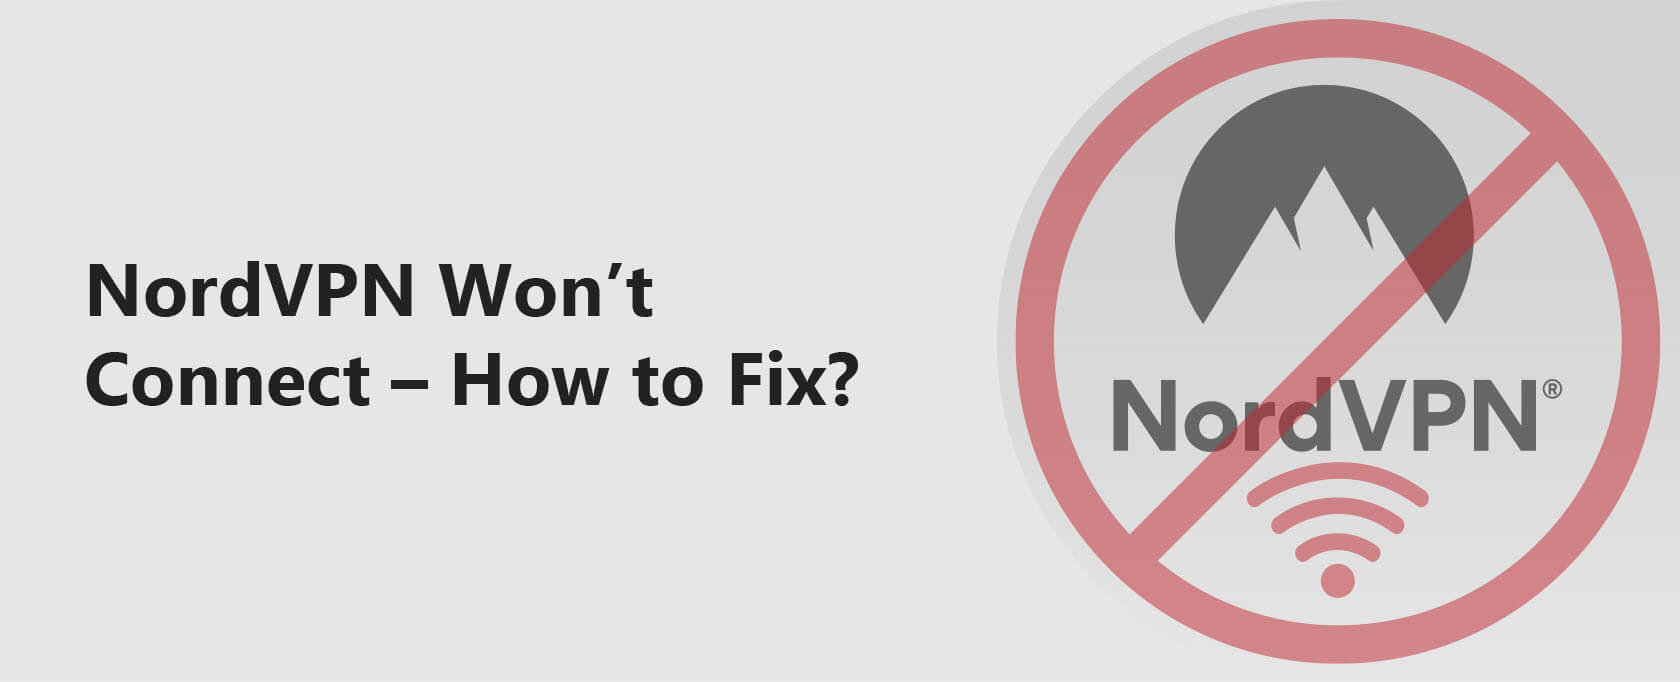 NordVPN Won’t Connect – How to Fix?